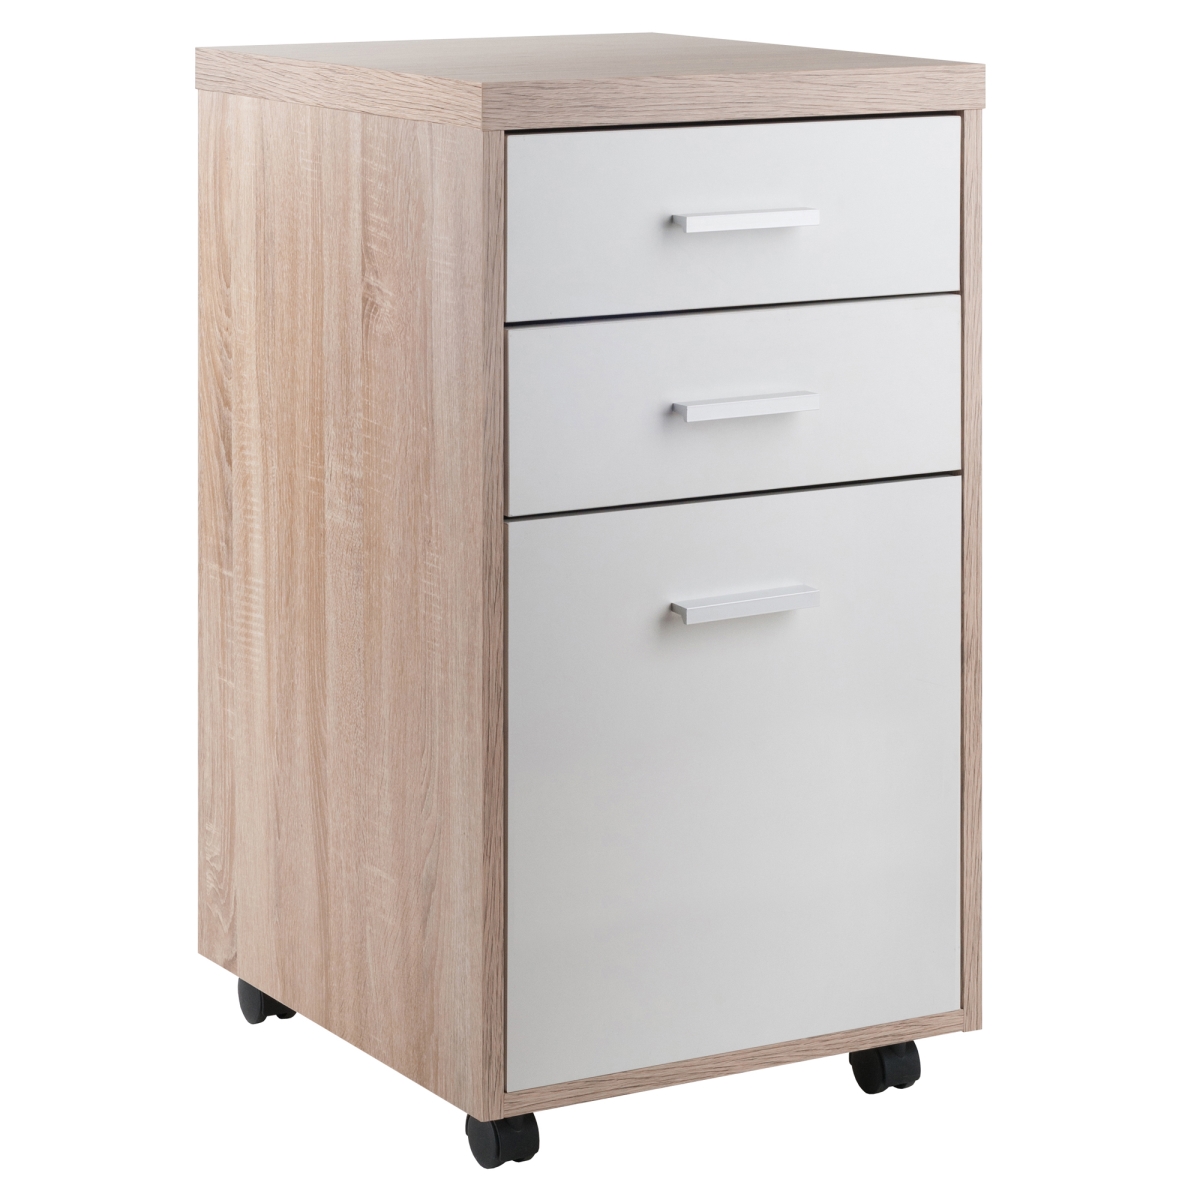 18316 Kenner Reclaimed Wood Mobile File Cabinet With 3 Drawers, White - 15.75 X 18.3 X 29.25 In.